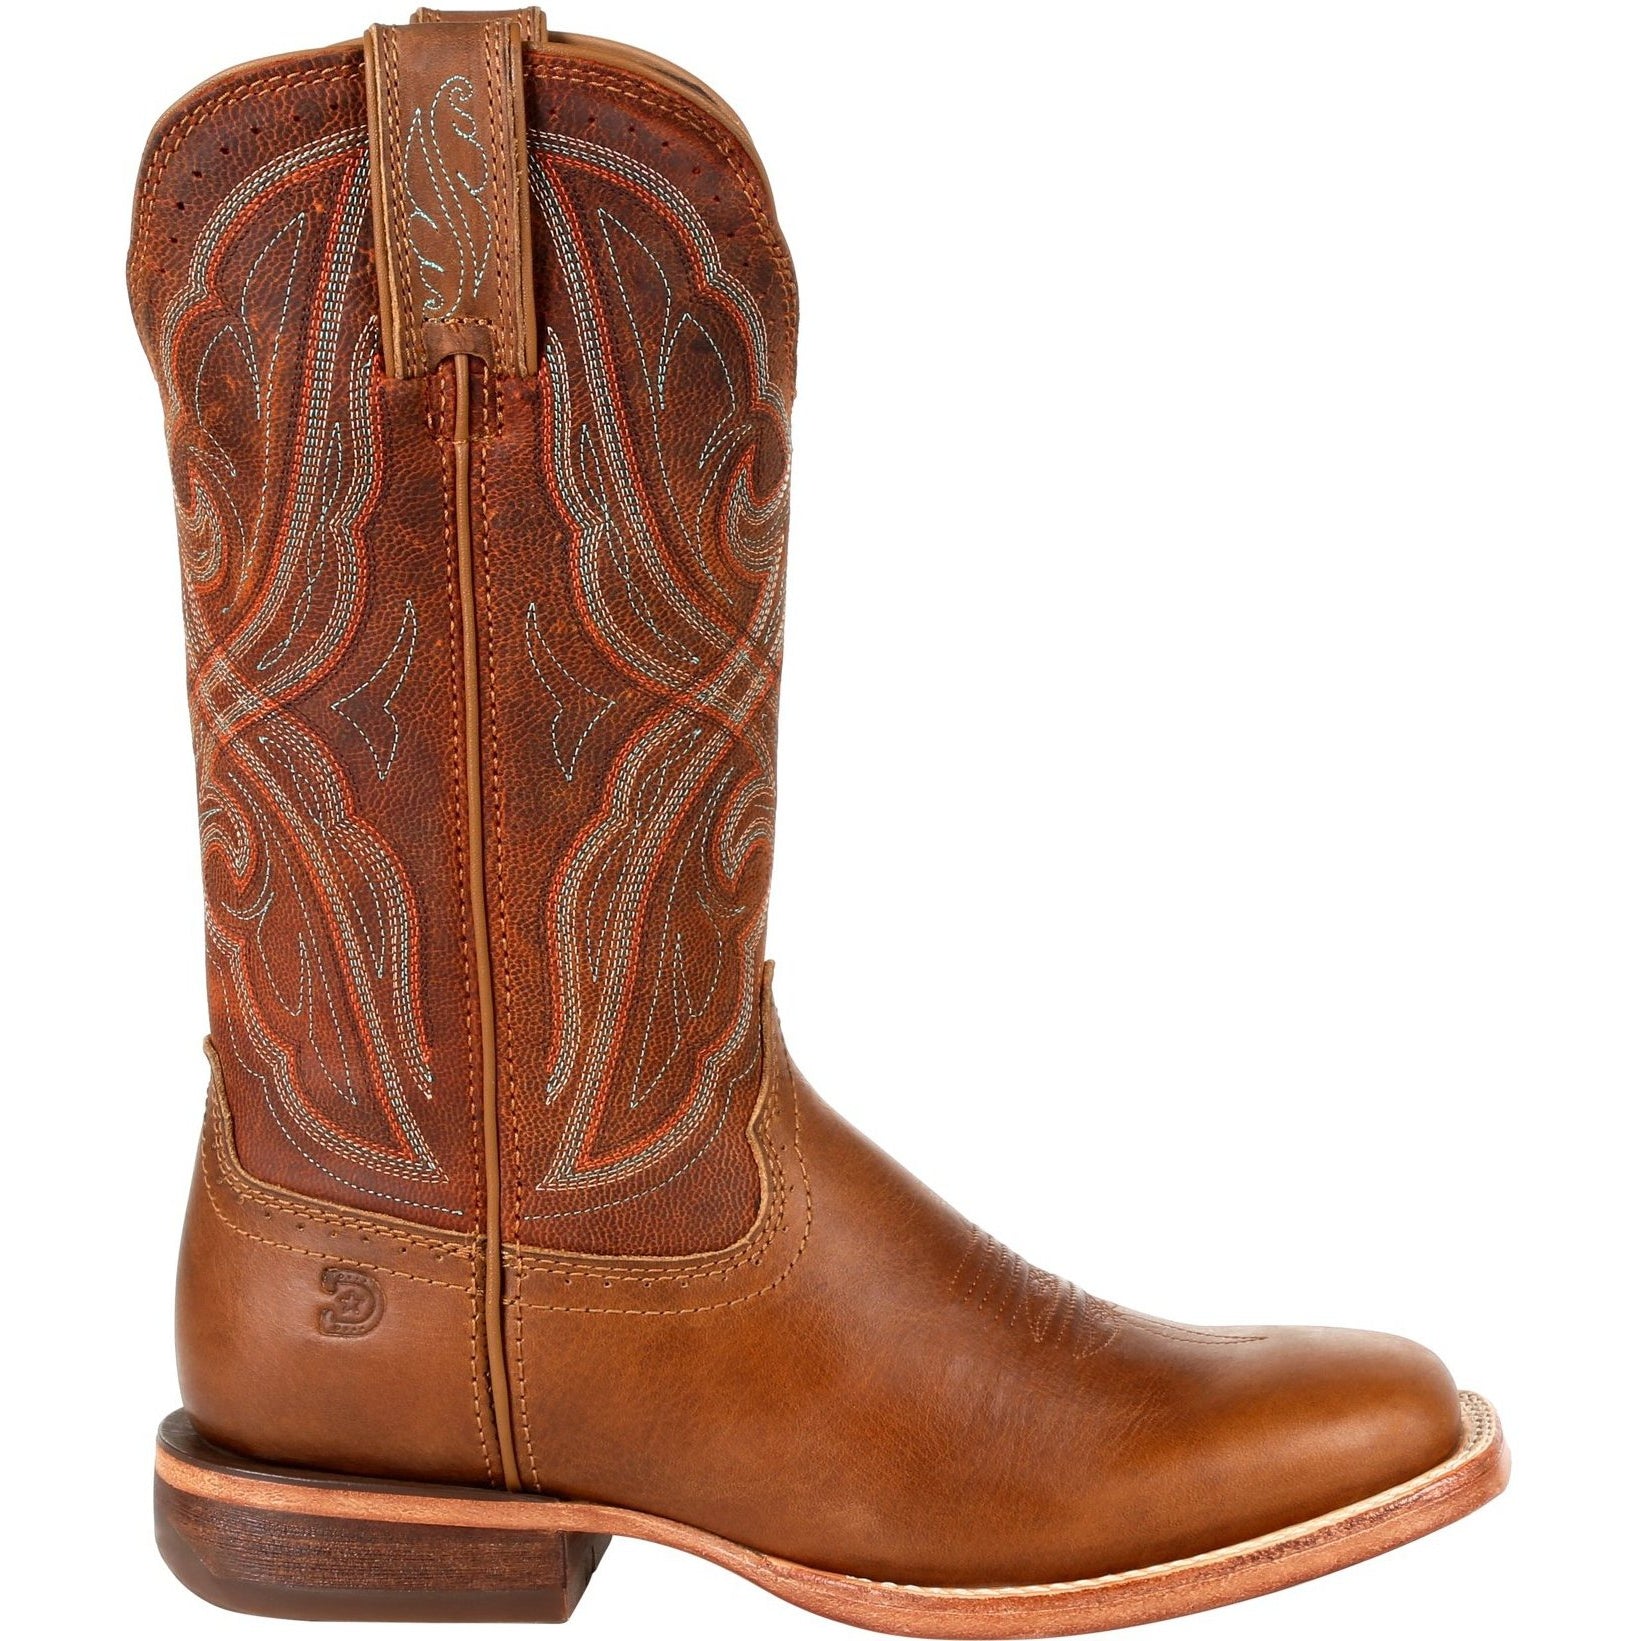 Durango Women's Arena Pro 12" Square Toe Western Boot Chestnut DRD0380  - Overlook Boots